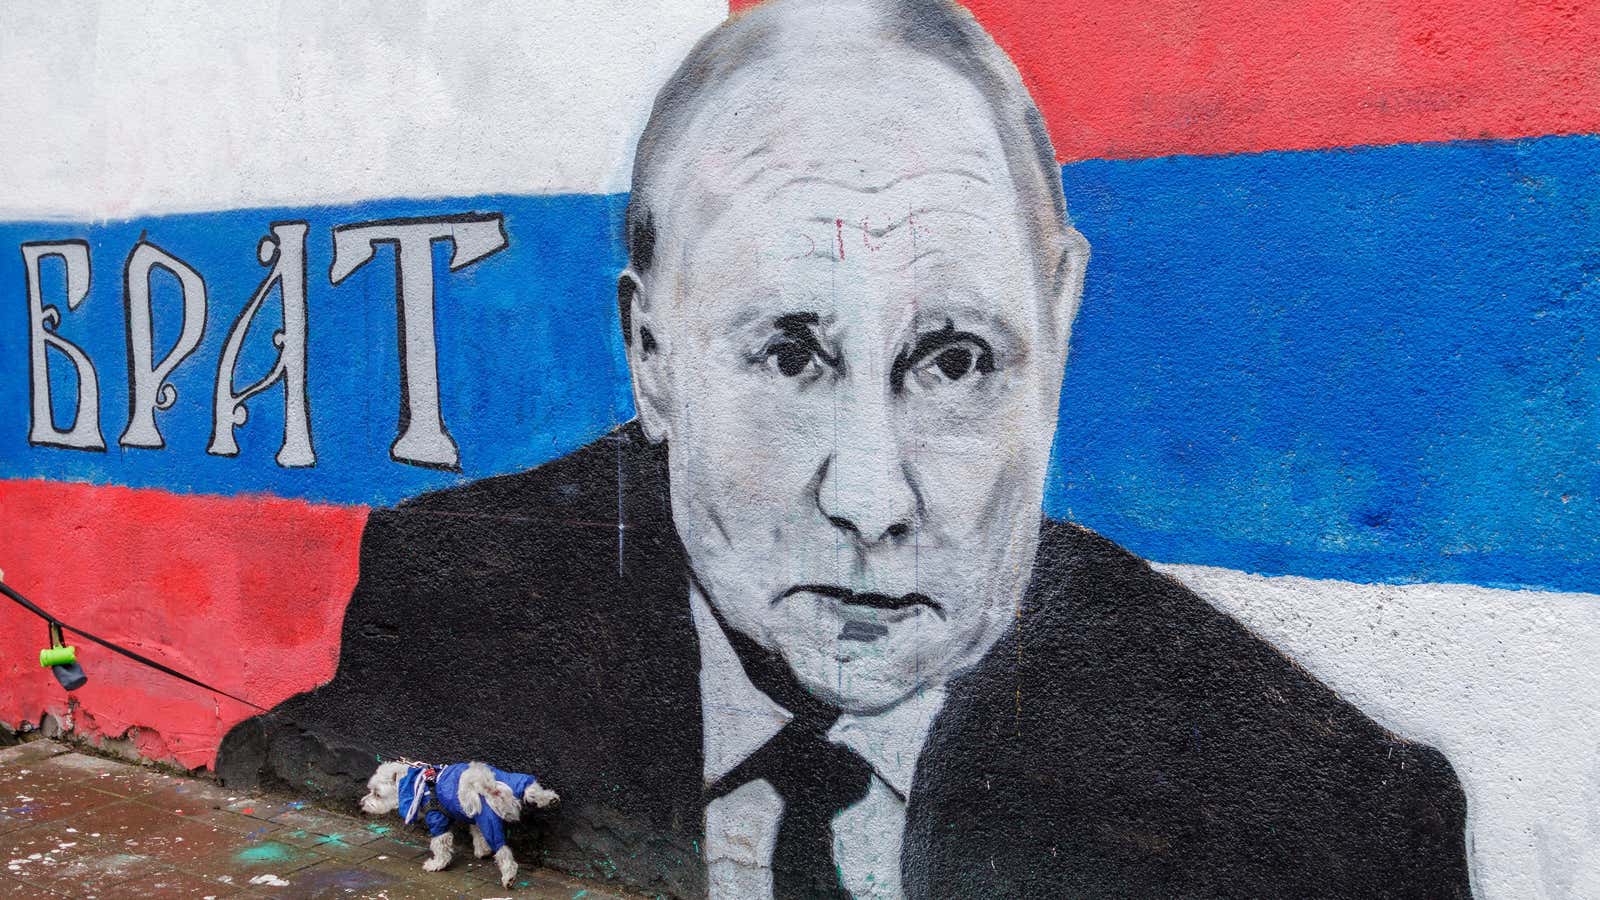 Vladimir Putin, shunned by the international community, is exerting himself to prop up the ruble.